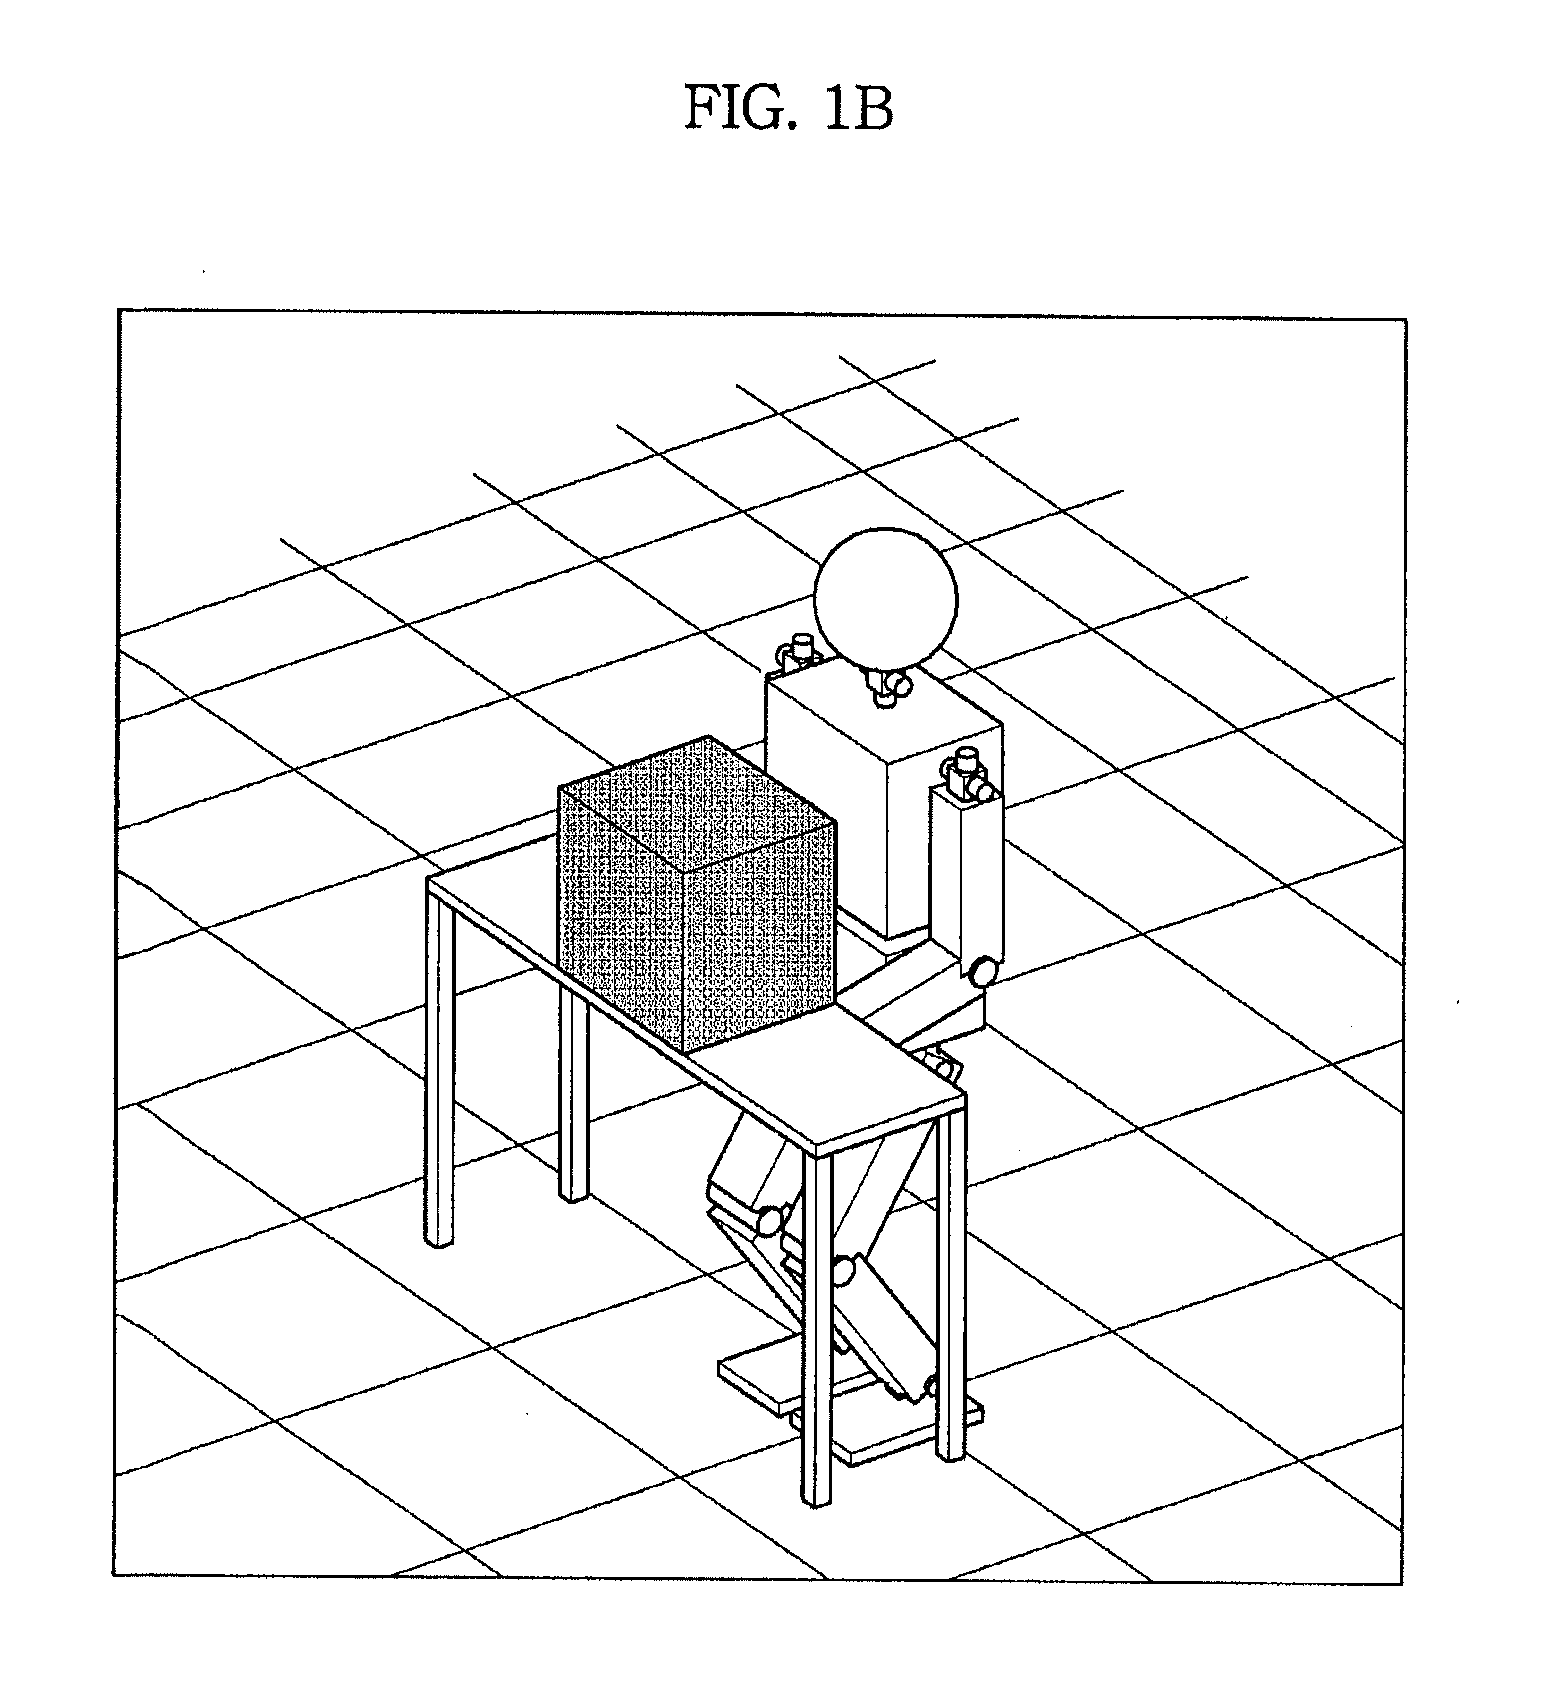 Apparatus and method for stabilizing humanoid robot